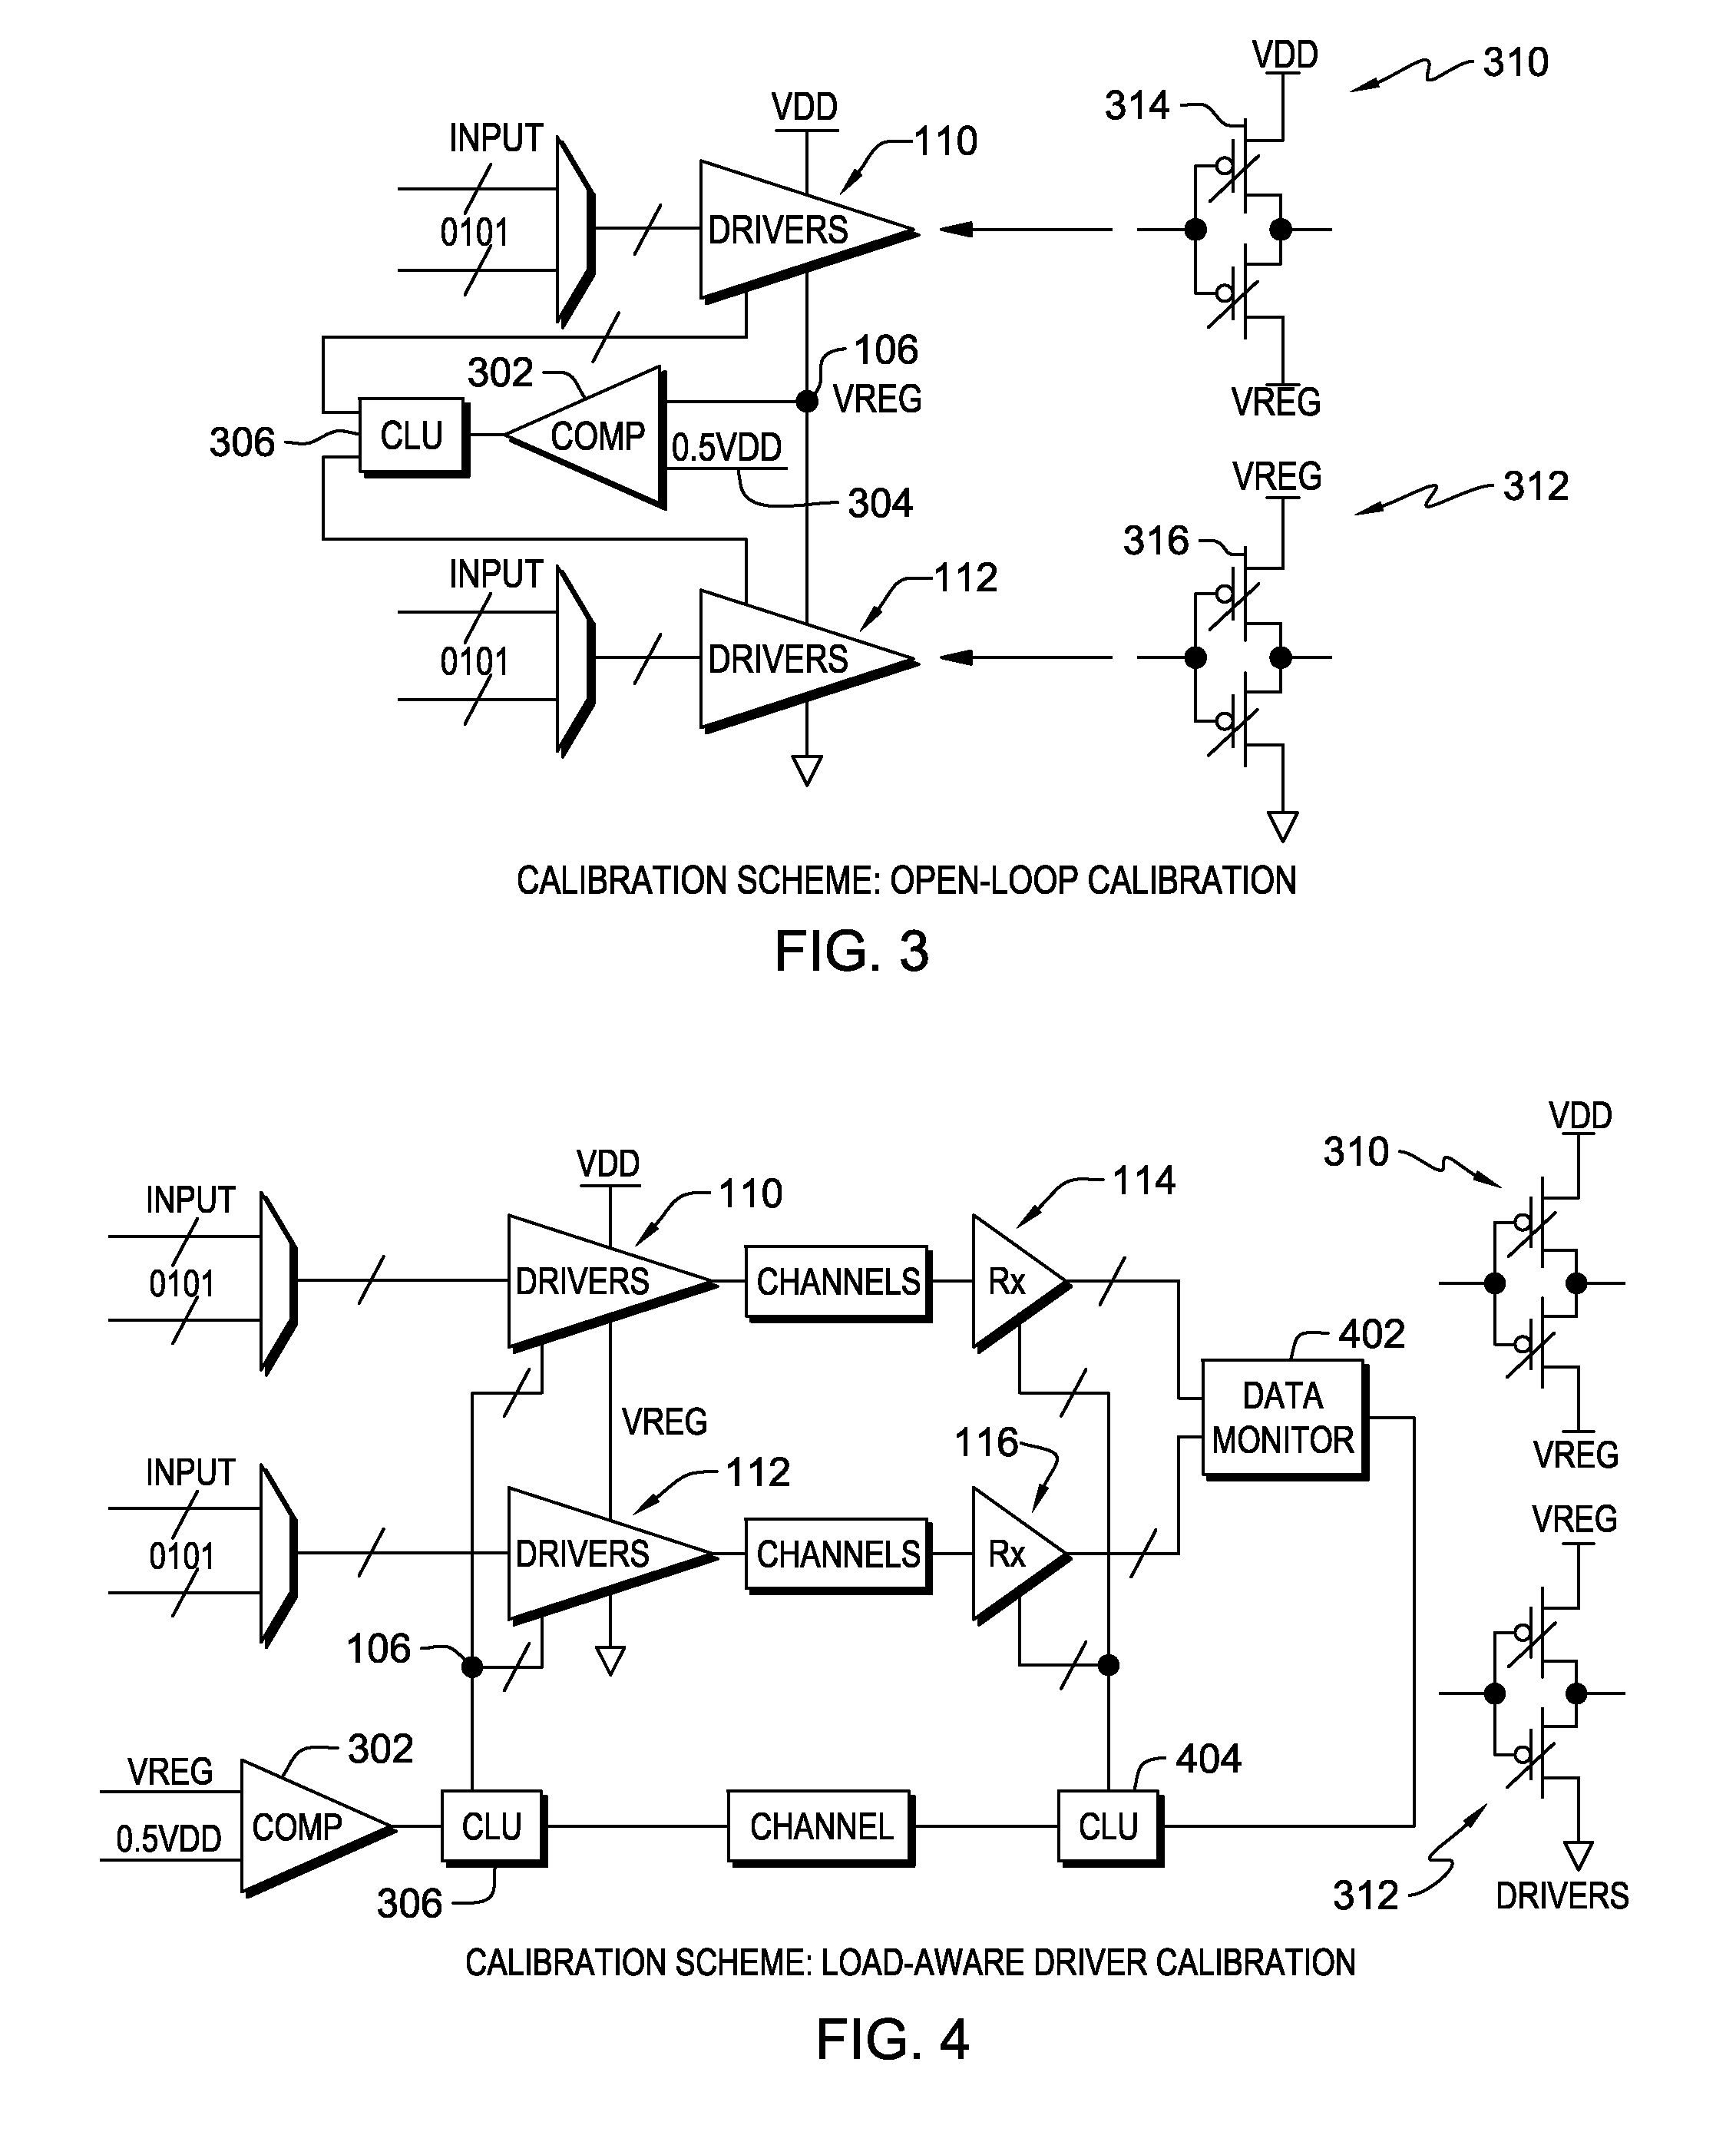 Calibration schemes for charge-recycling stacked voltage domains